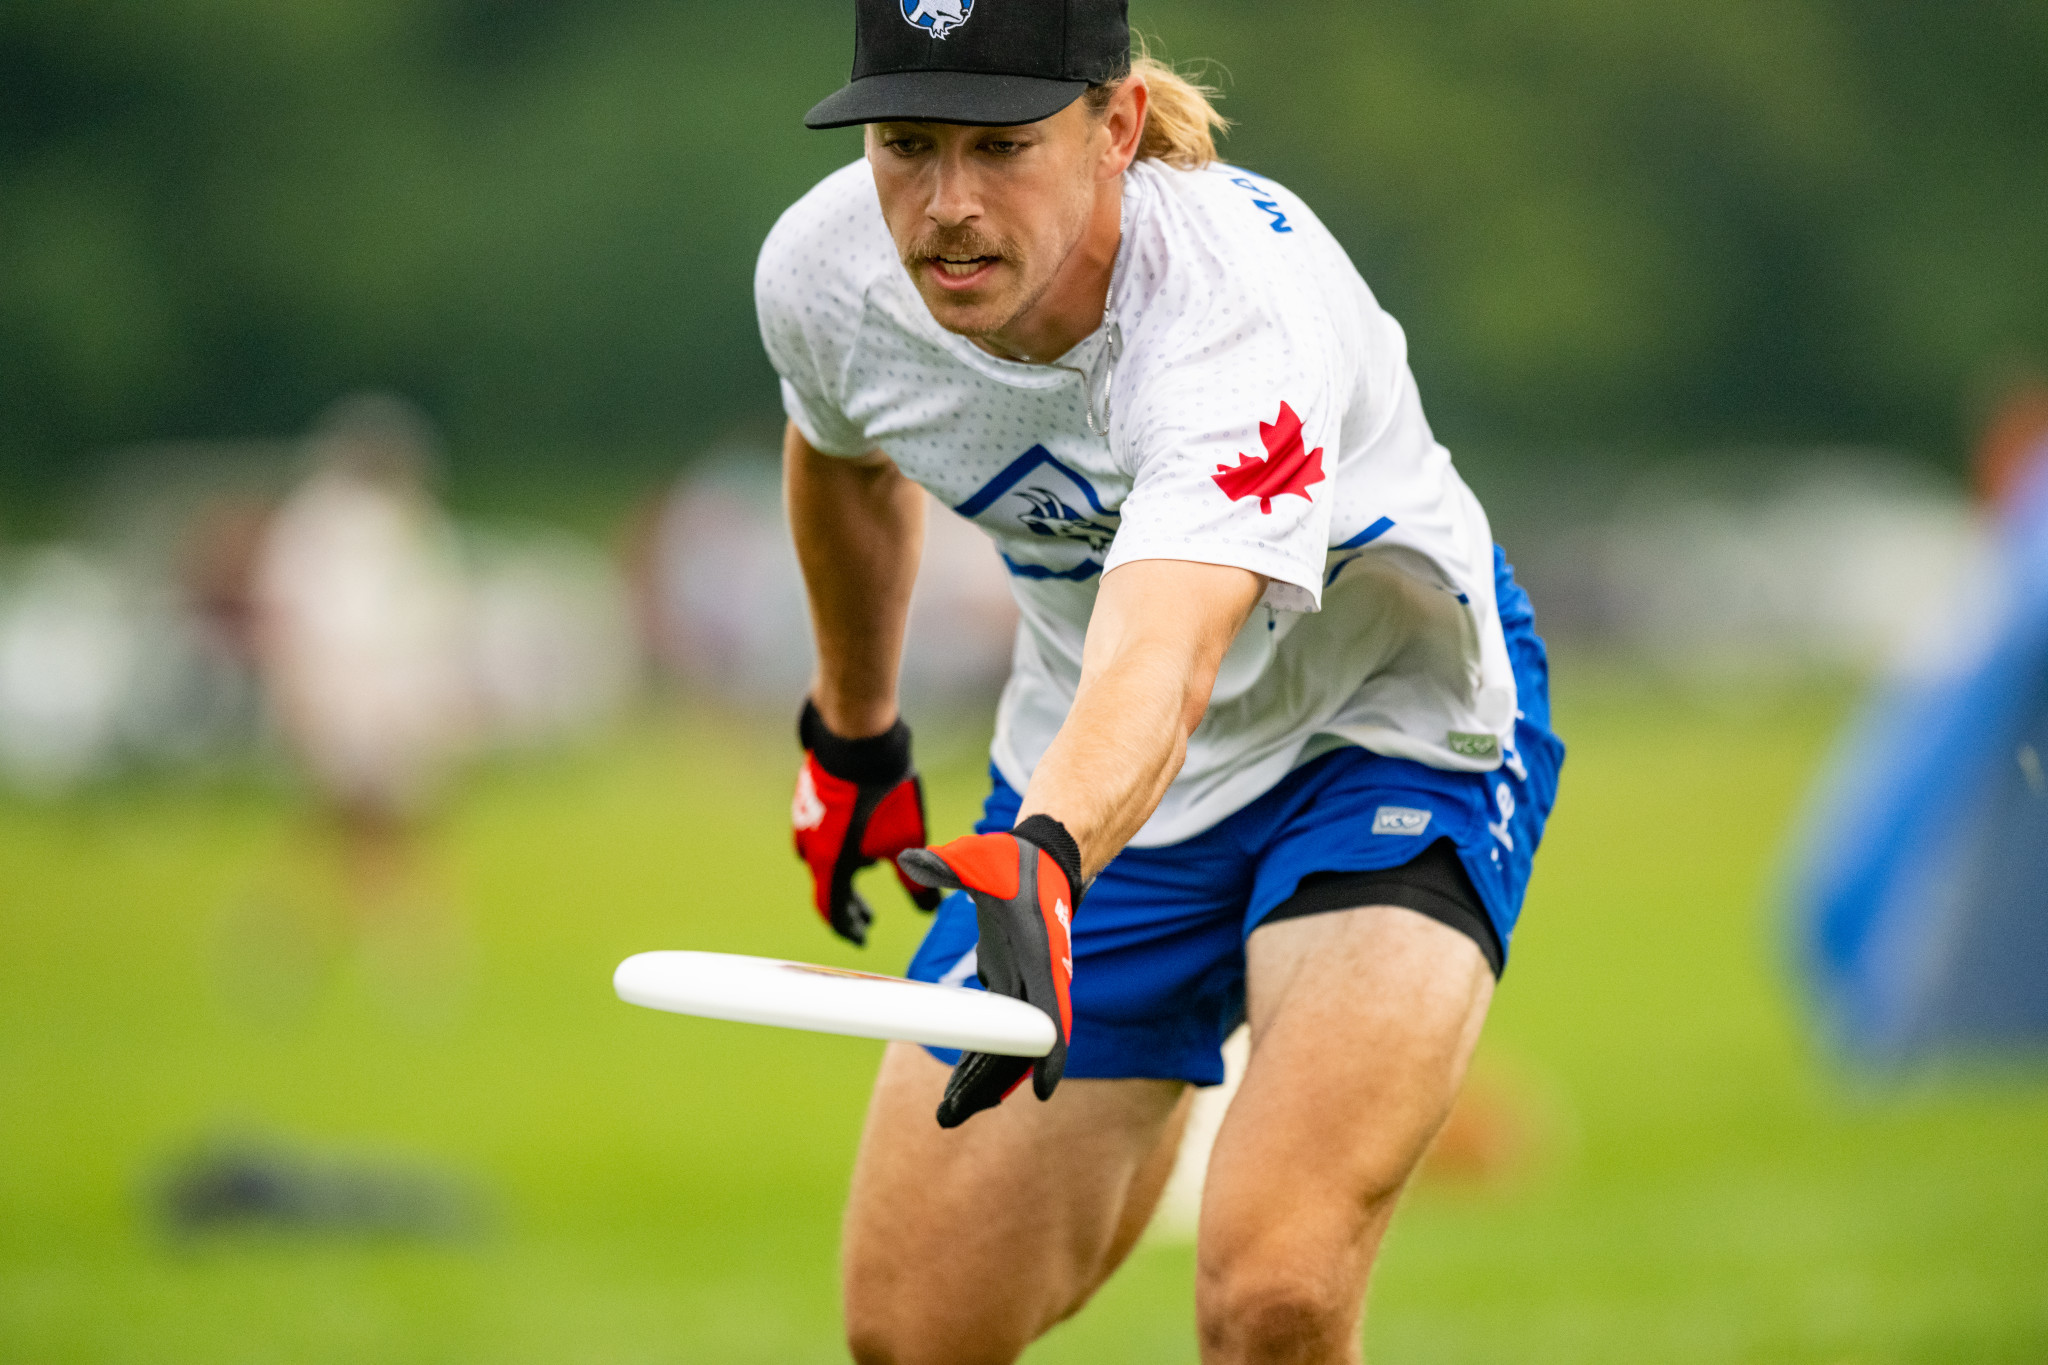 GOAT's Michael MacKenzie recorded two assists for his team today in the open event ©Samuel Hotaling for UltiPhotos